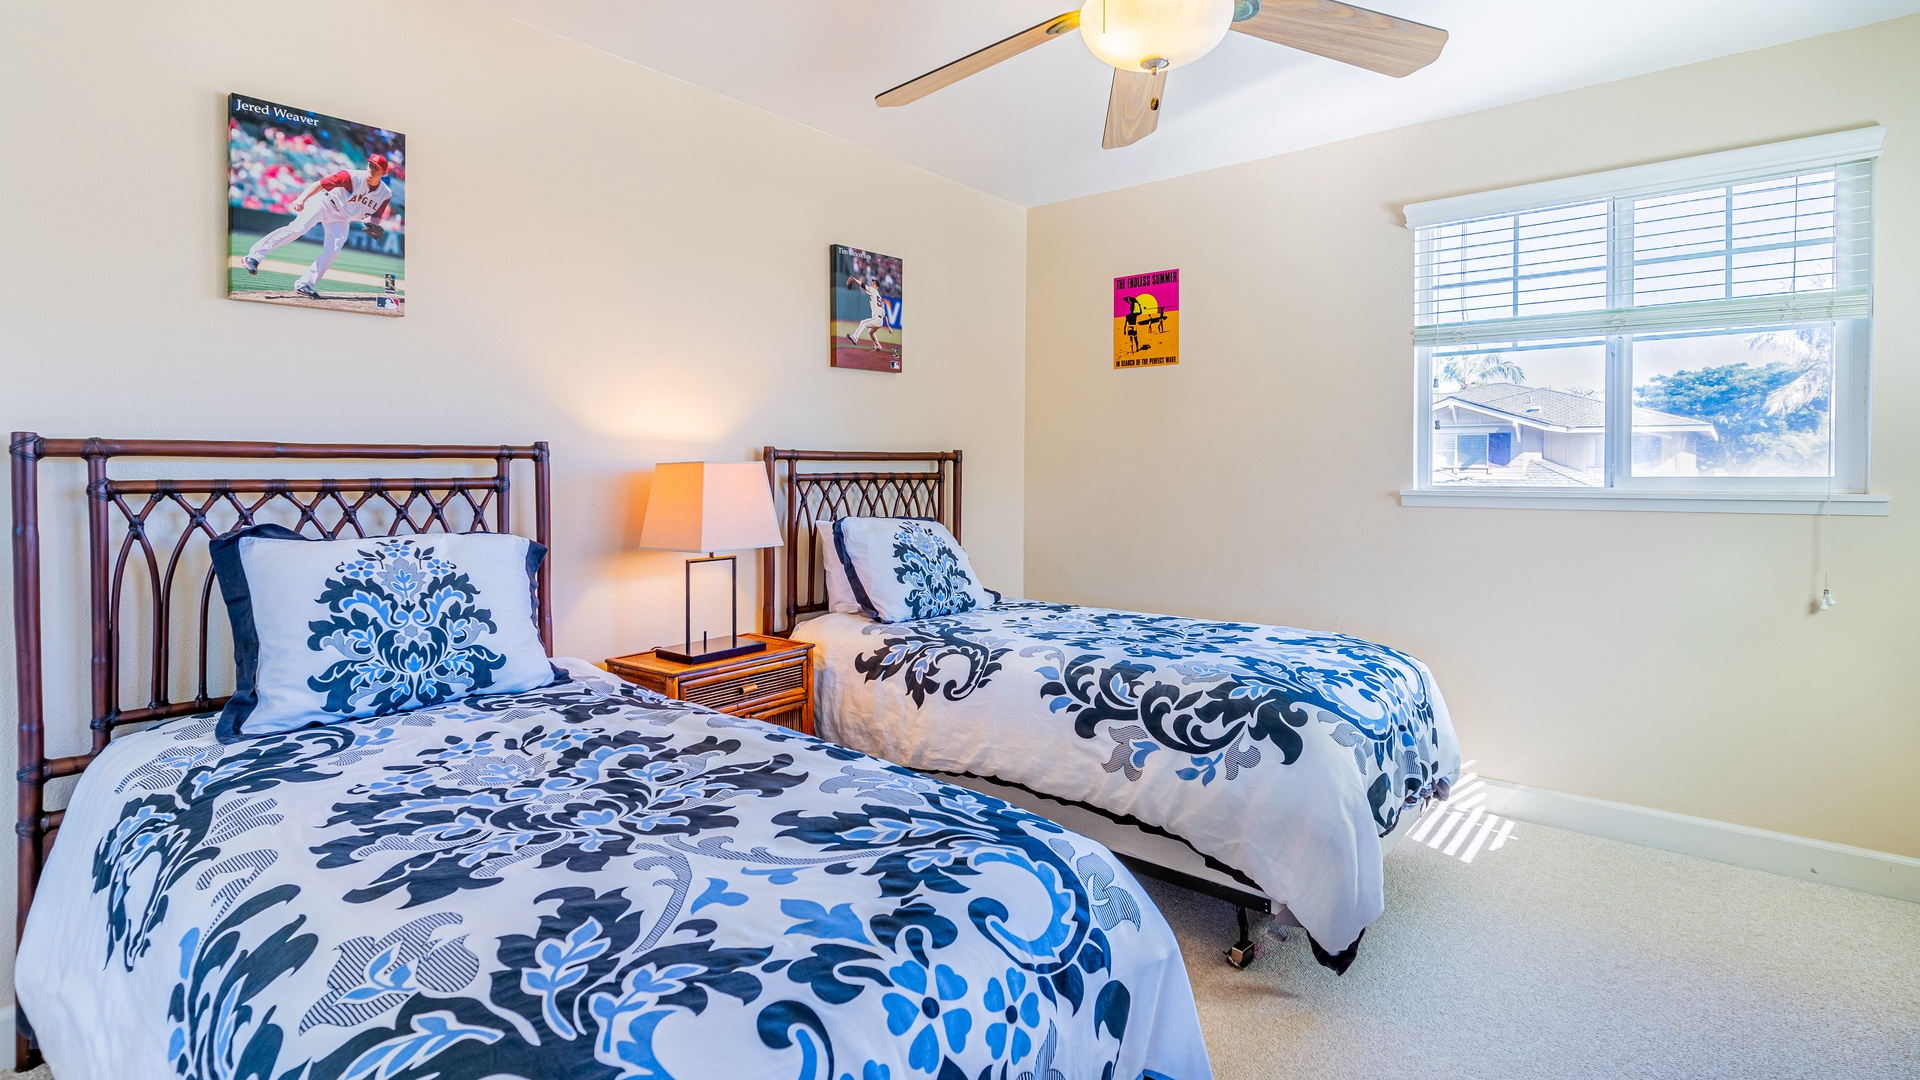 Kapolei Vacation Rentals, Ko Olina Kai 1033C - The inviting second guest bedroom with twin beds and luxurious comforters.